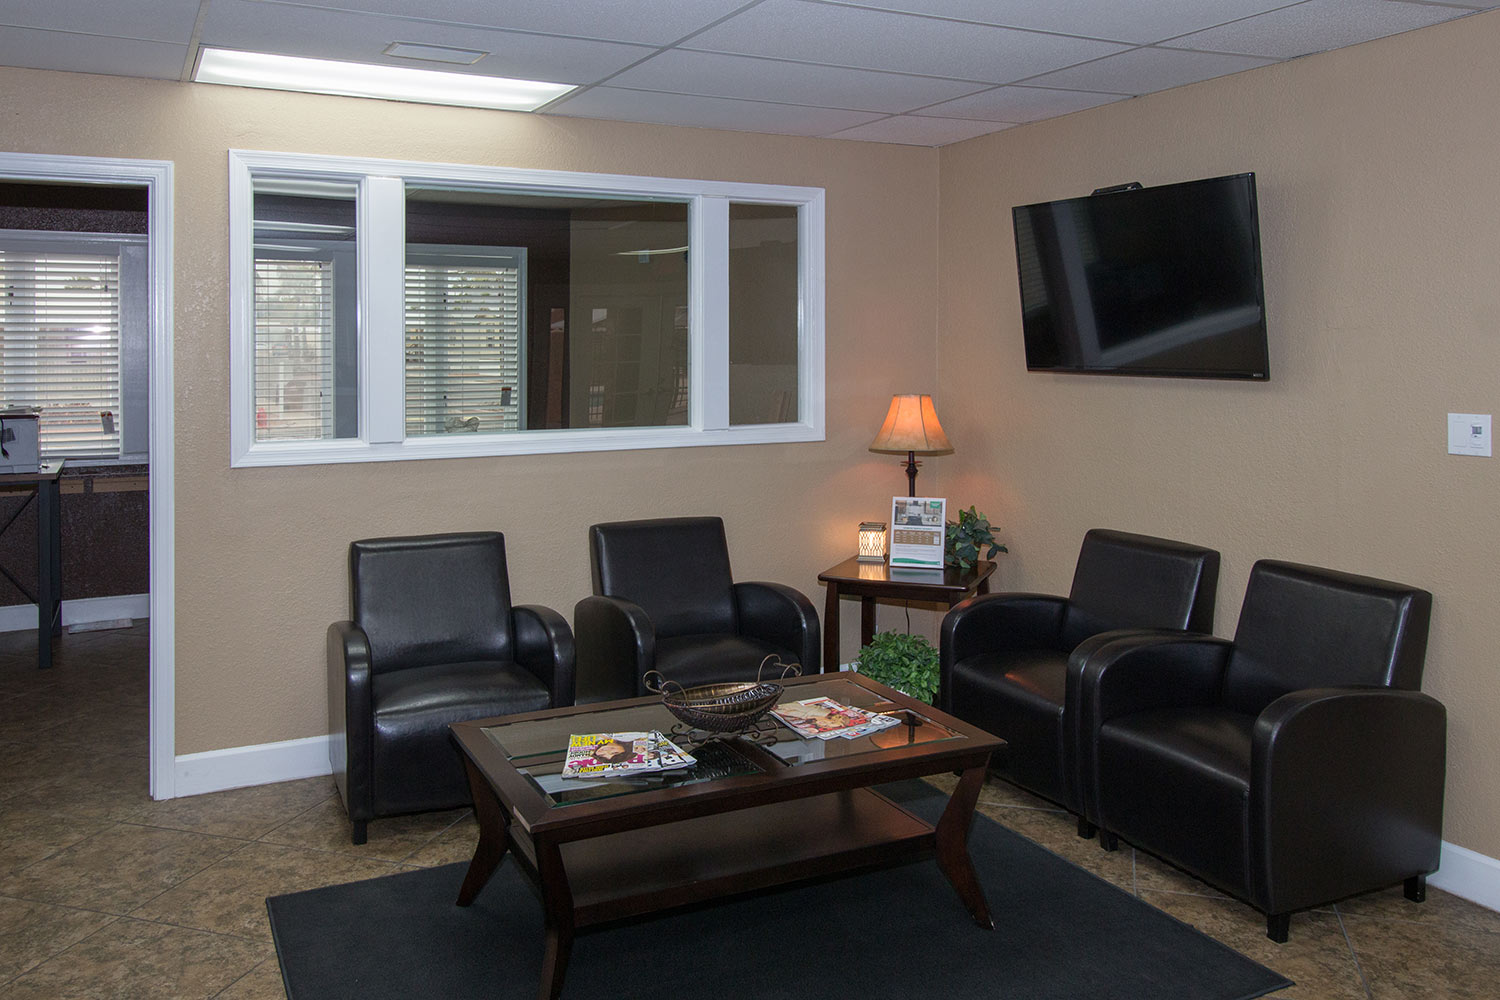 Lounge area in clubhouse with comfortable leather chairs and flat screen TV on wall